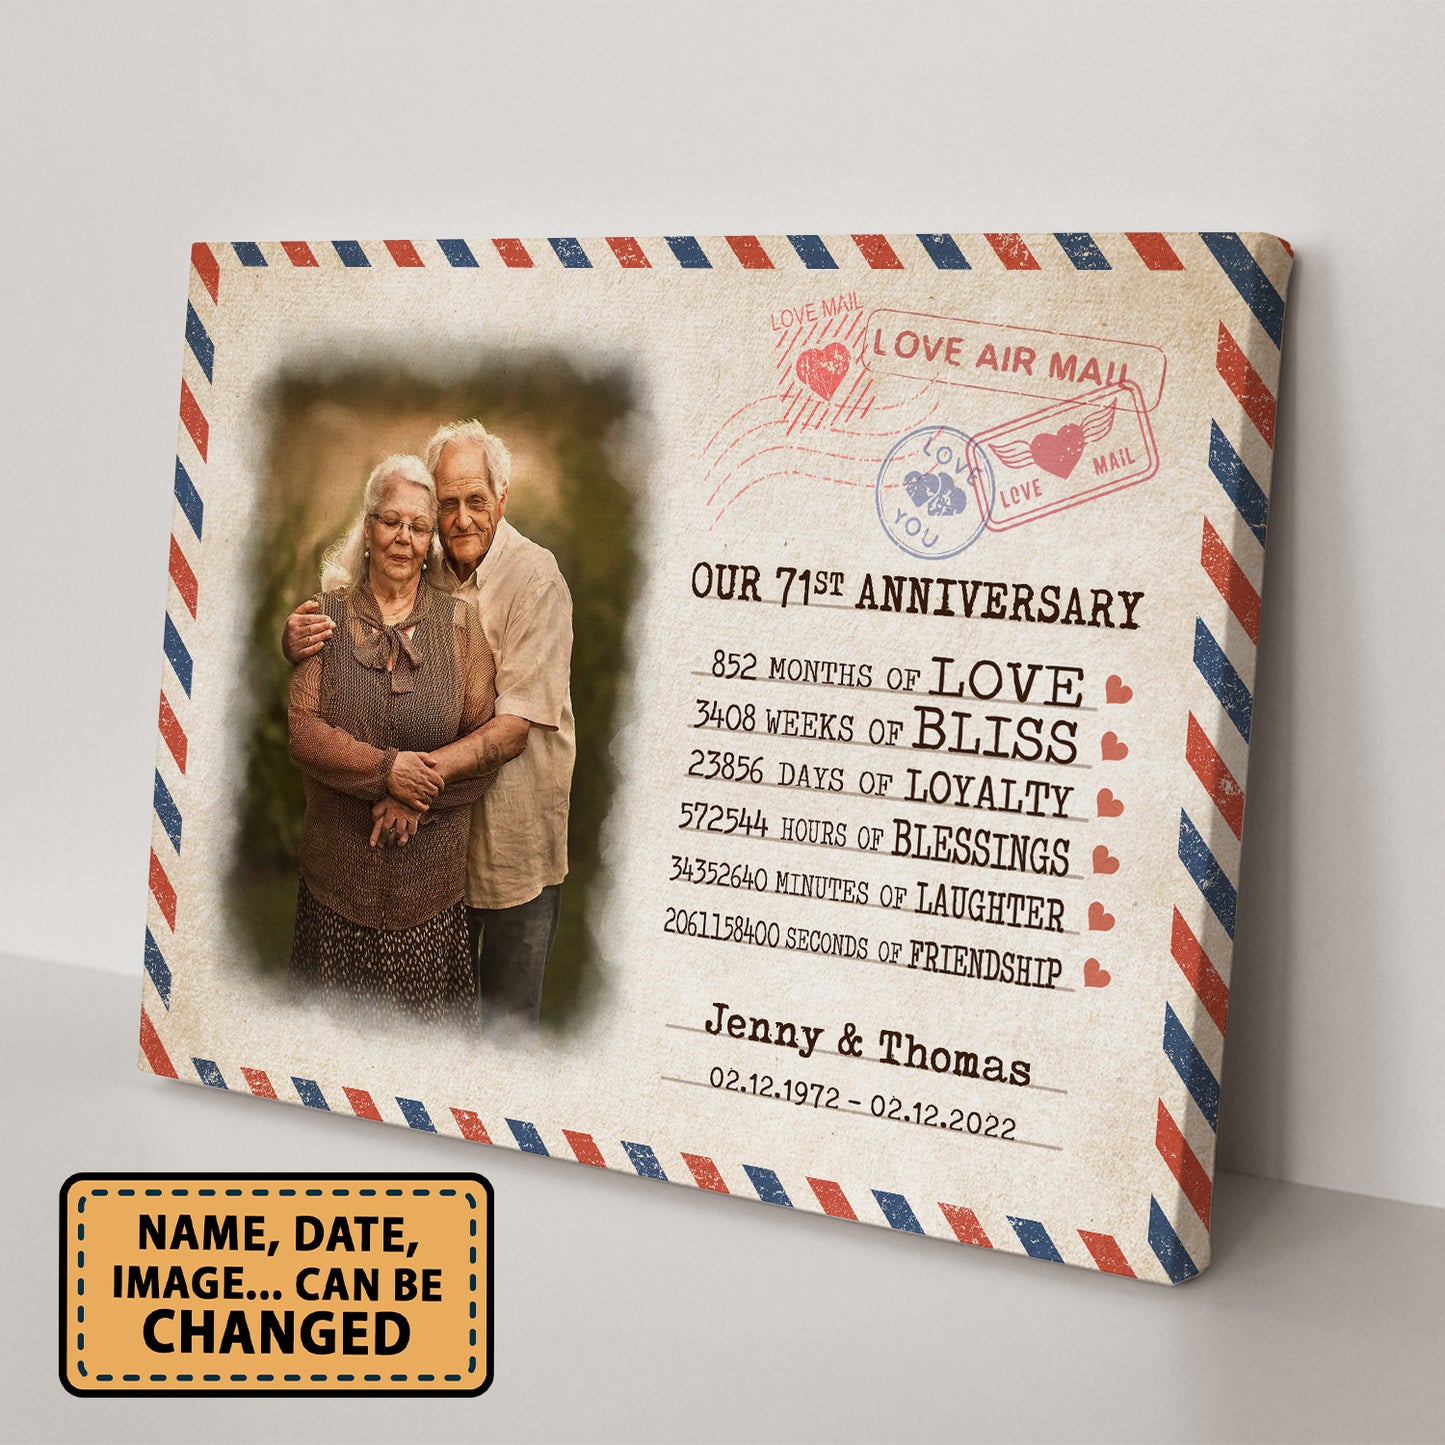 Our 71st Anniversary Letter Valentine Gift Personalized Canvas